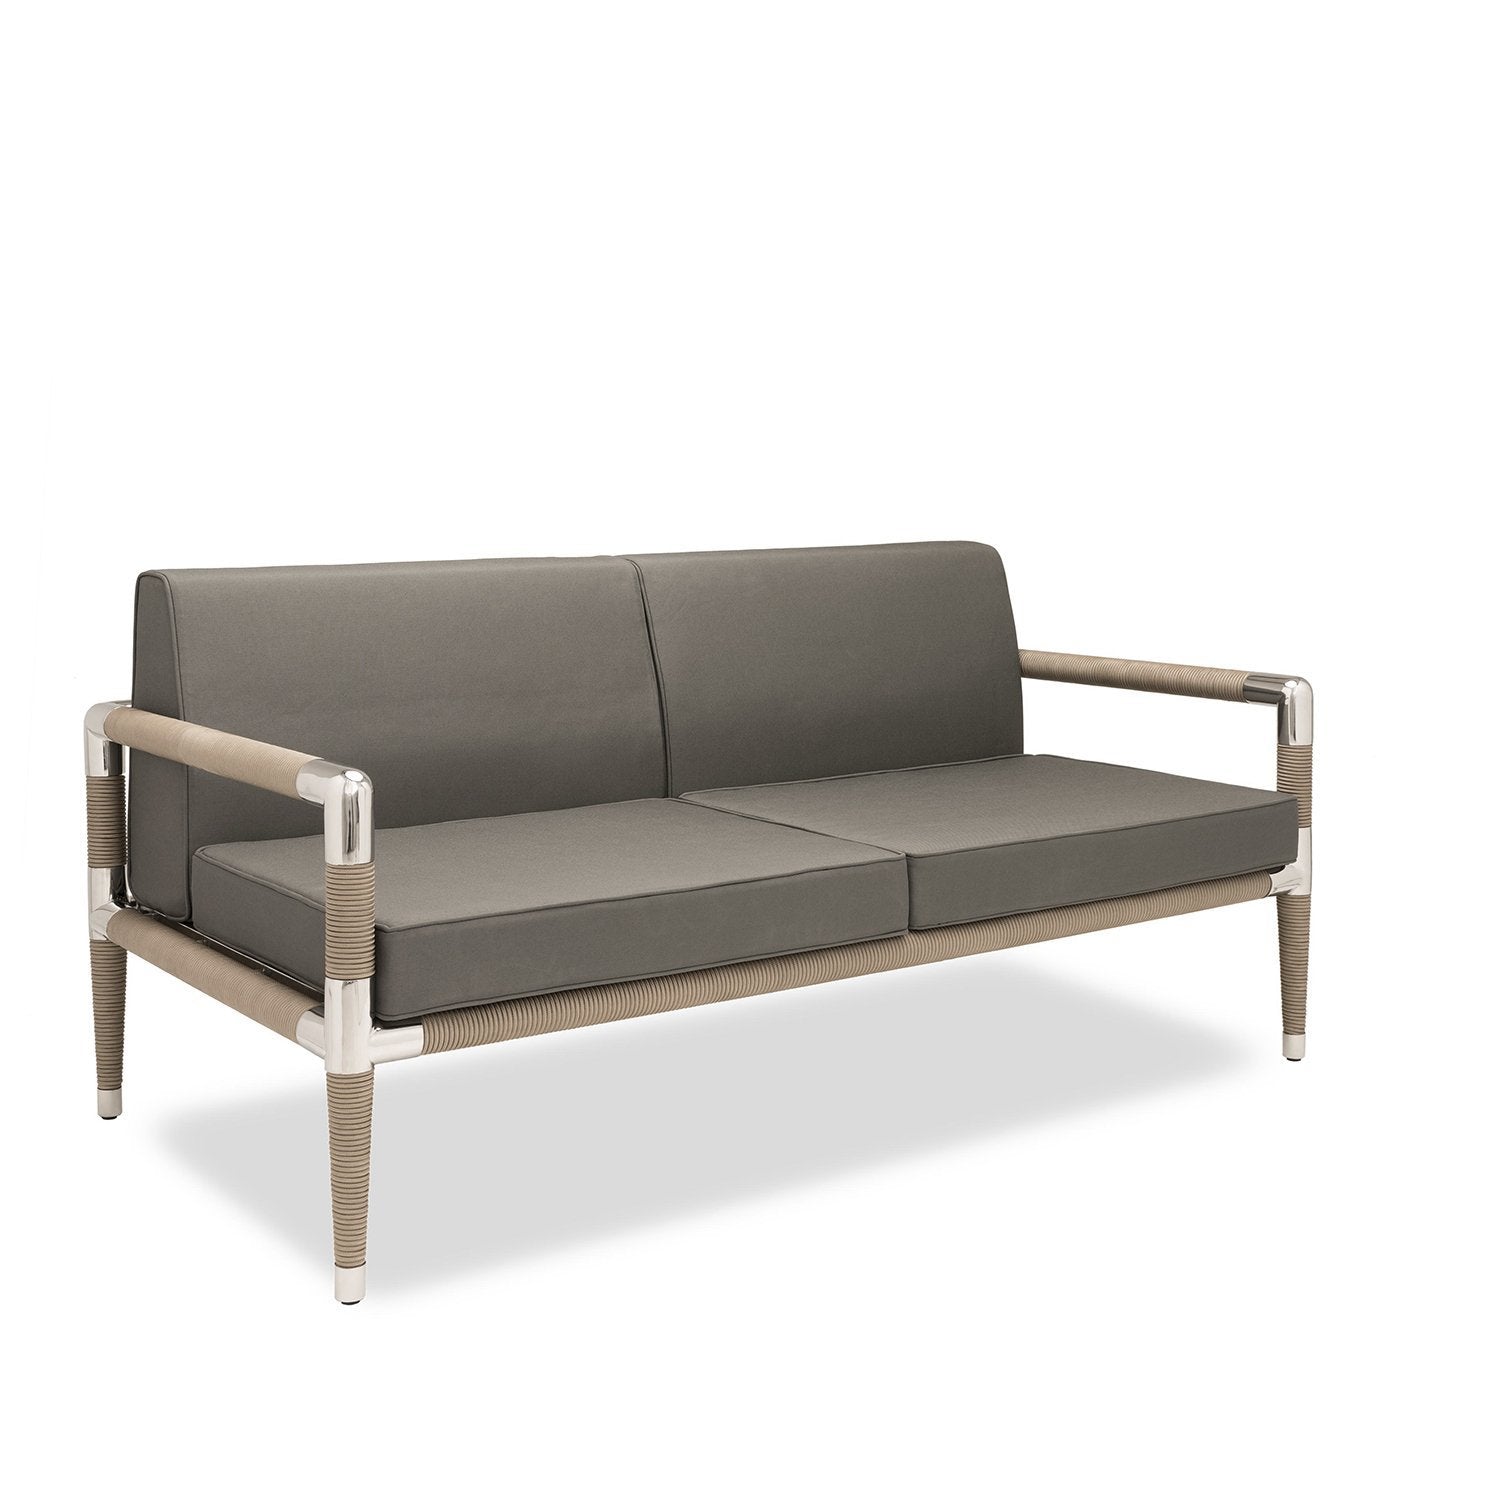 Marina two seat sofa in electro polioshed stainless steel